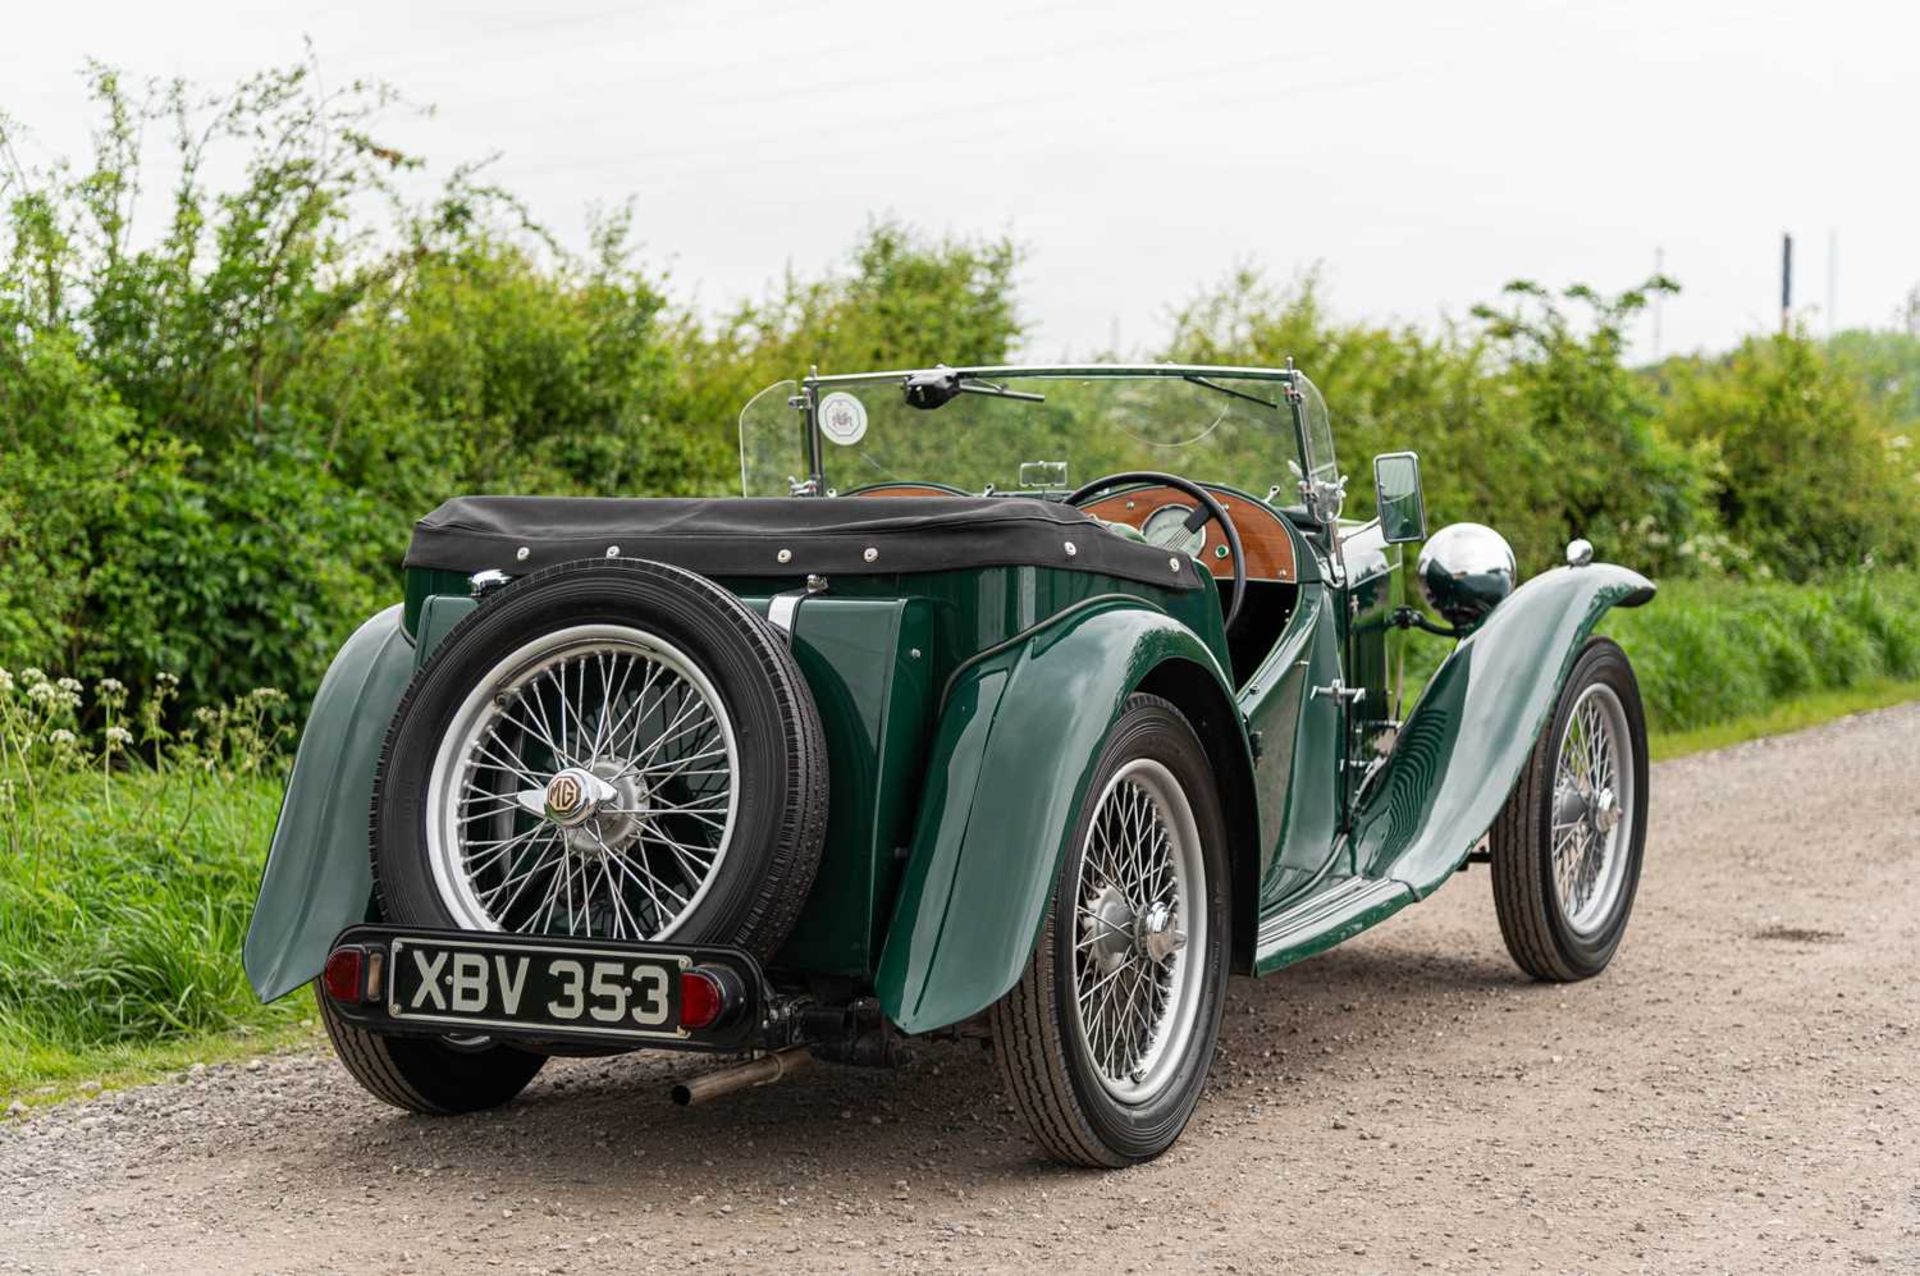 1947 MG TC Midget  Fully restored, right-hand-drive UK home market example - Image 13 of 76